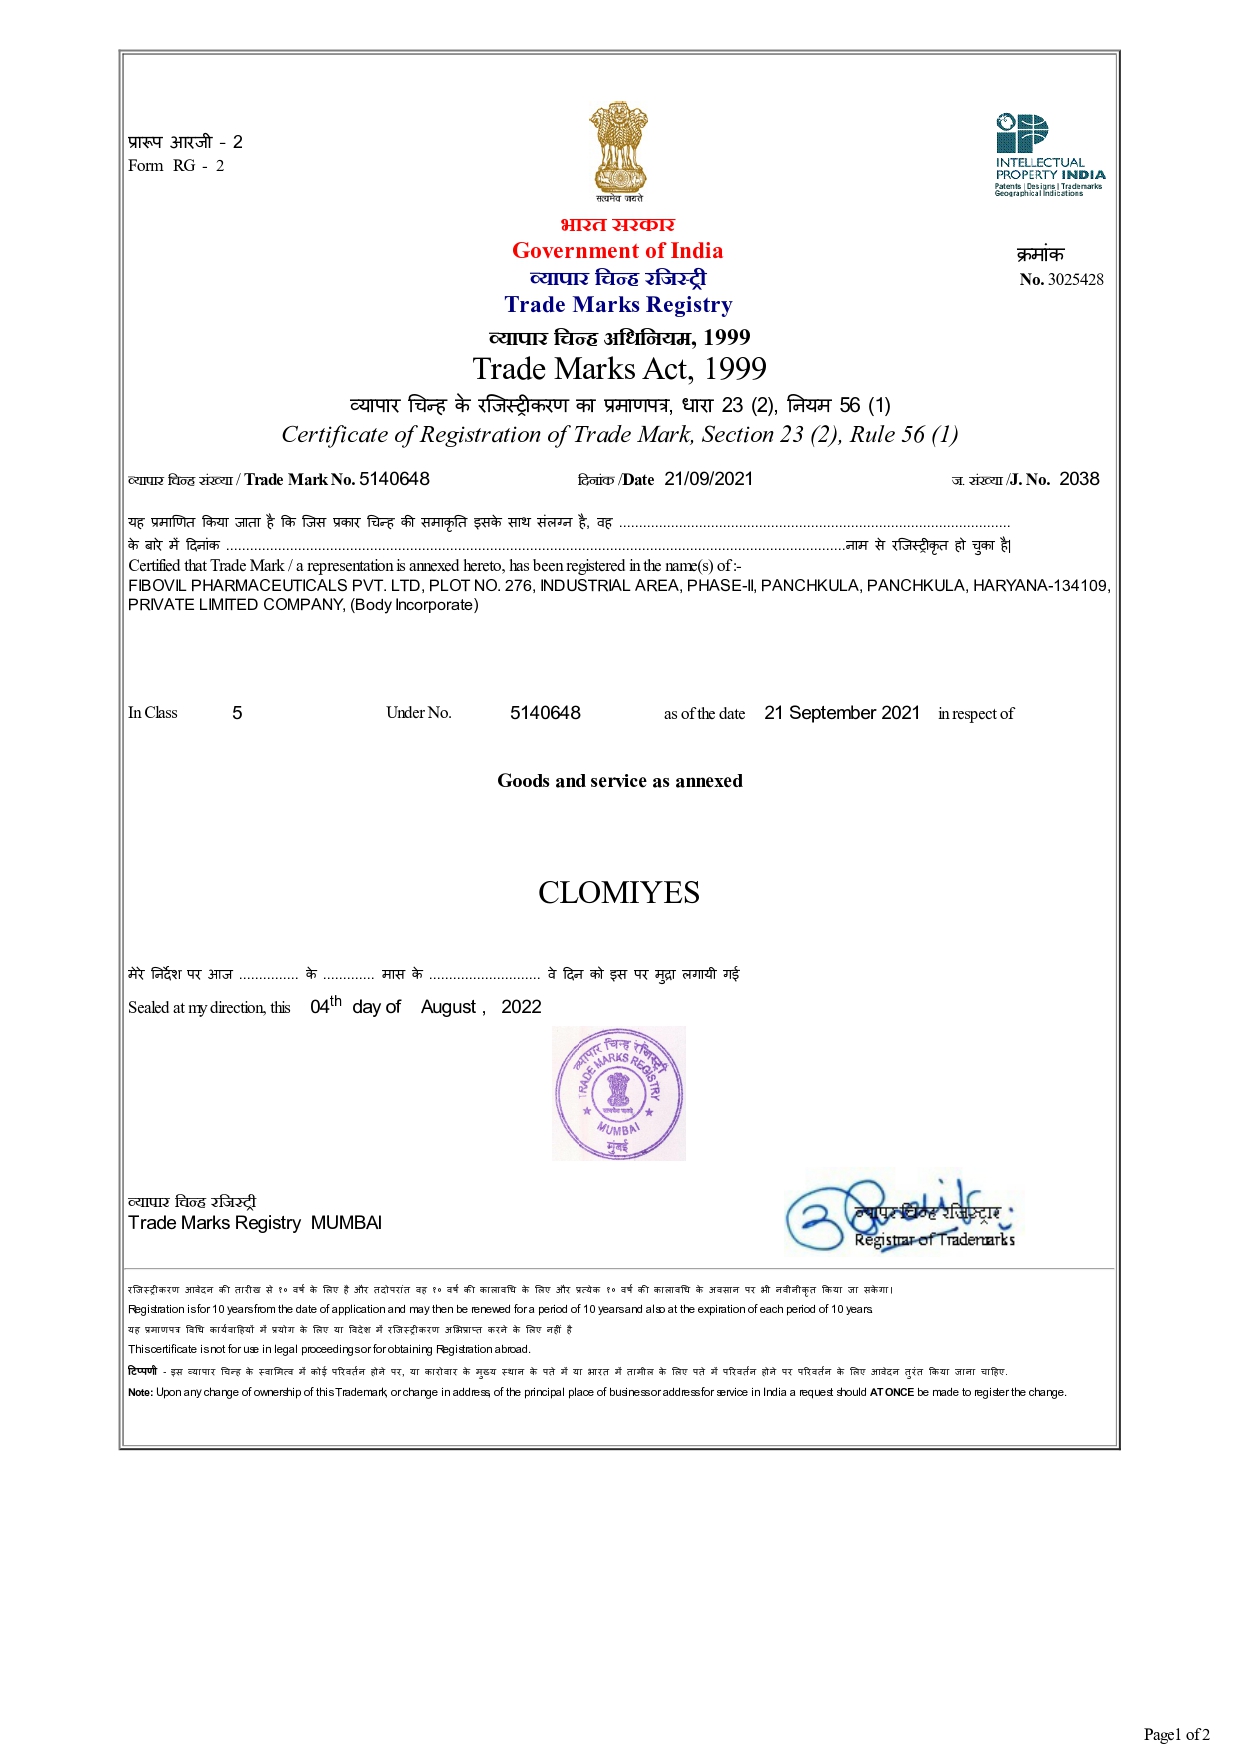 Registered Certificate of CLOMIYES